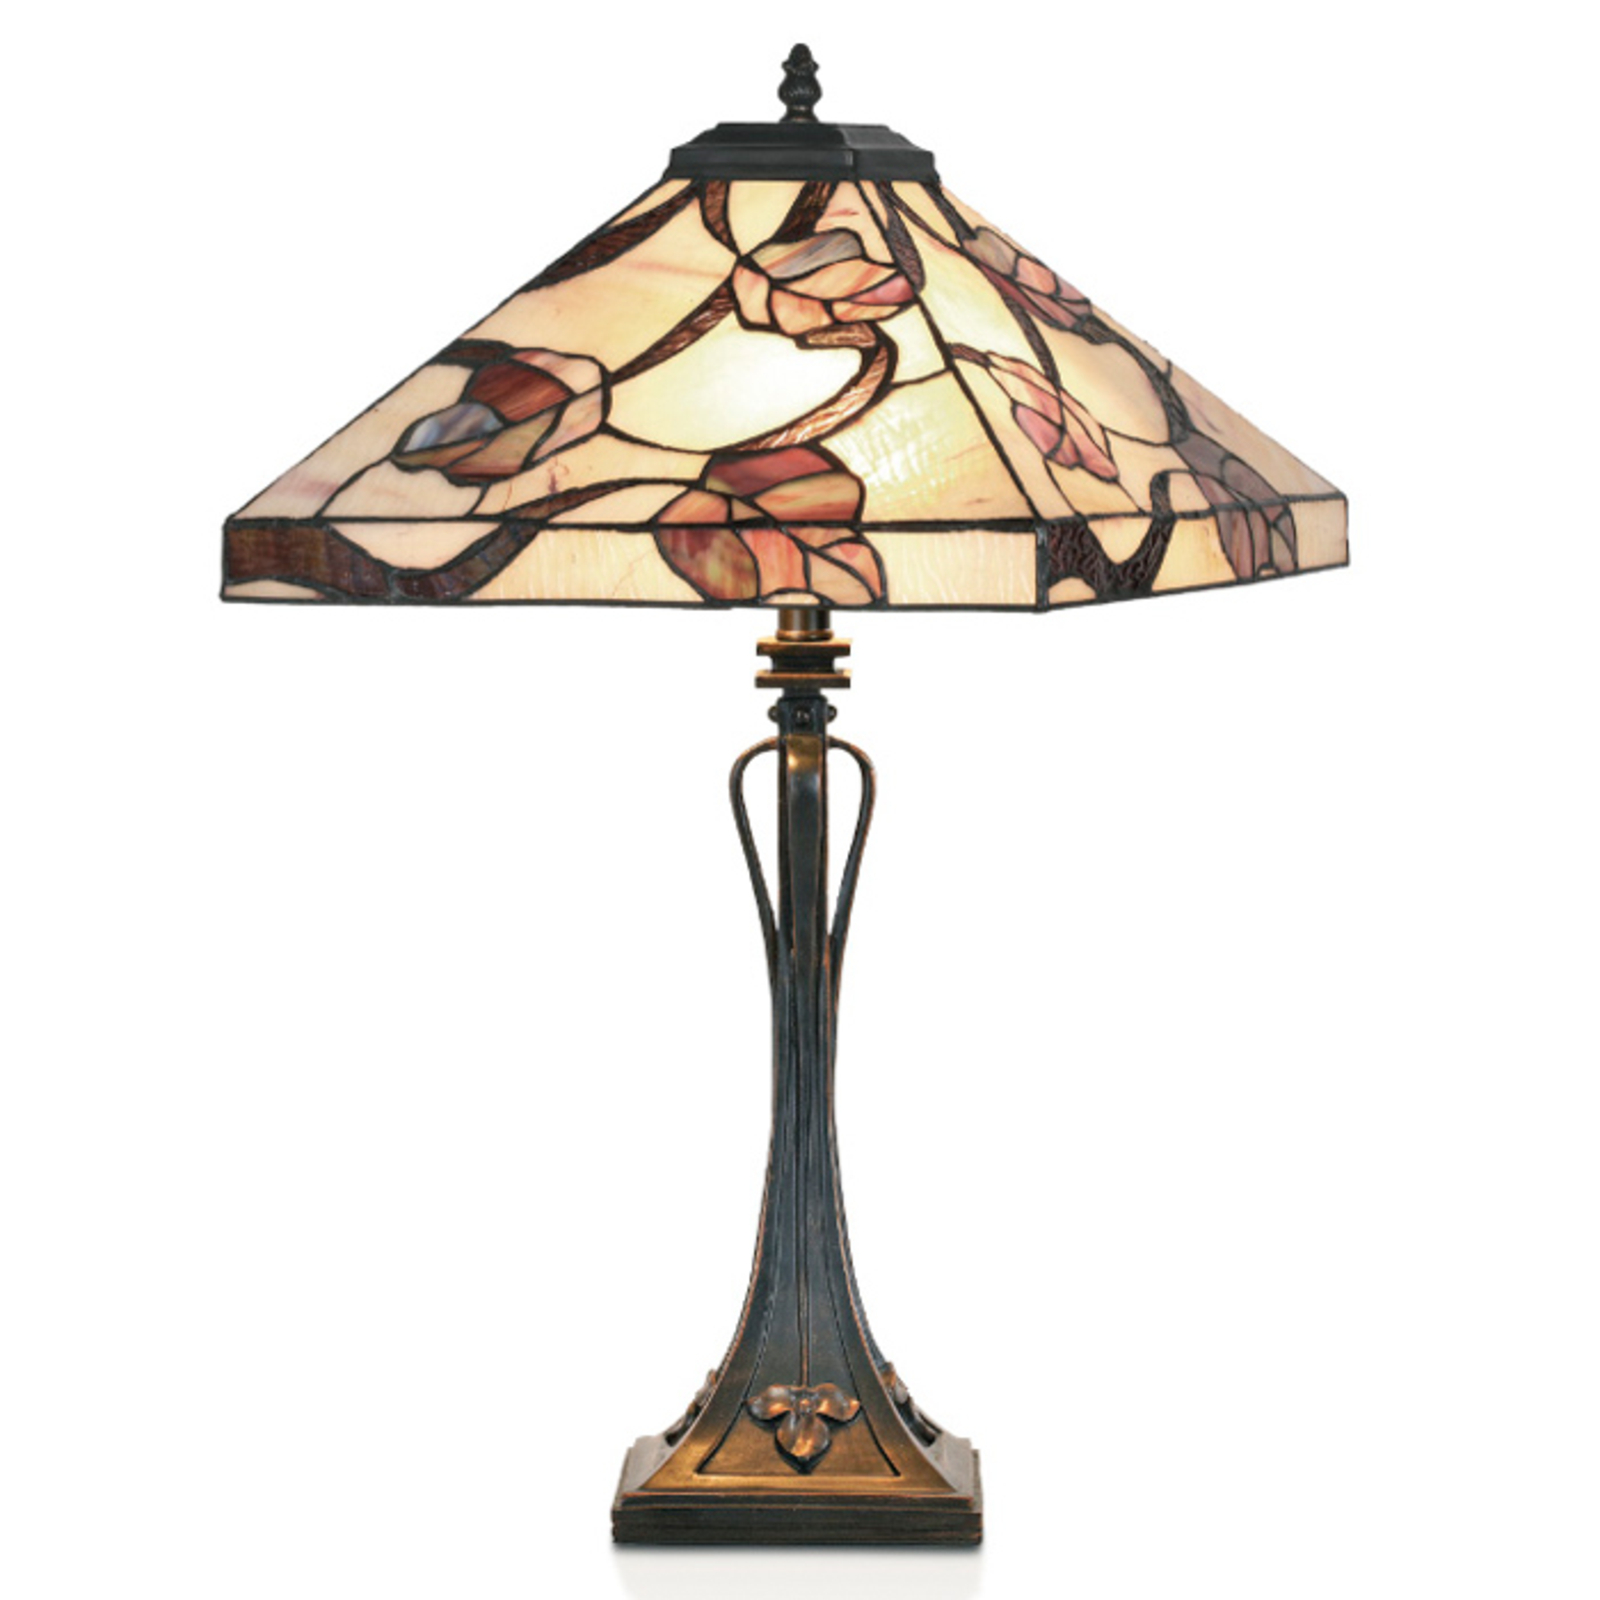 Table lamp APPOLONIA in the Tiffany style